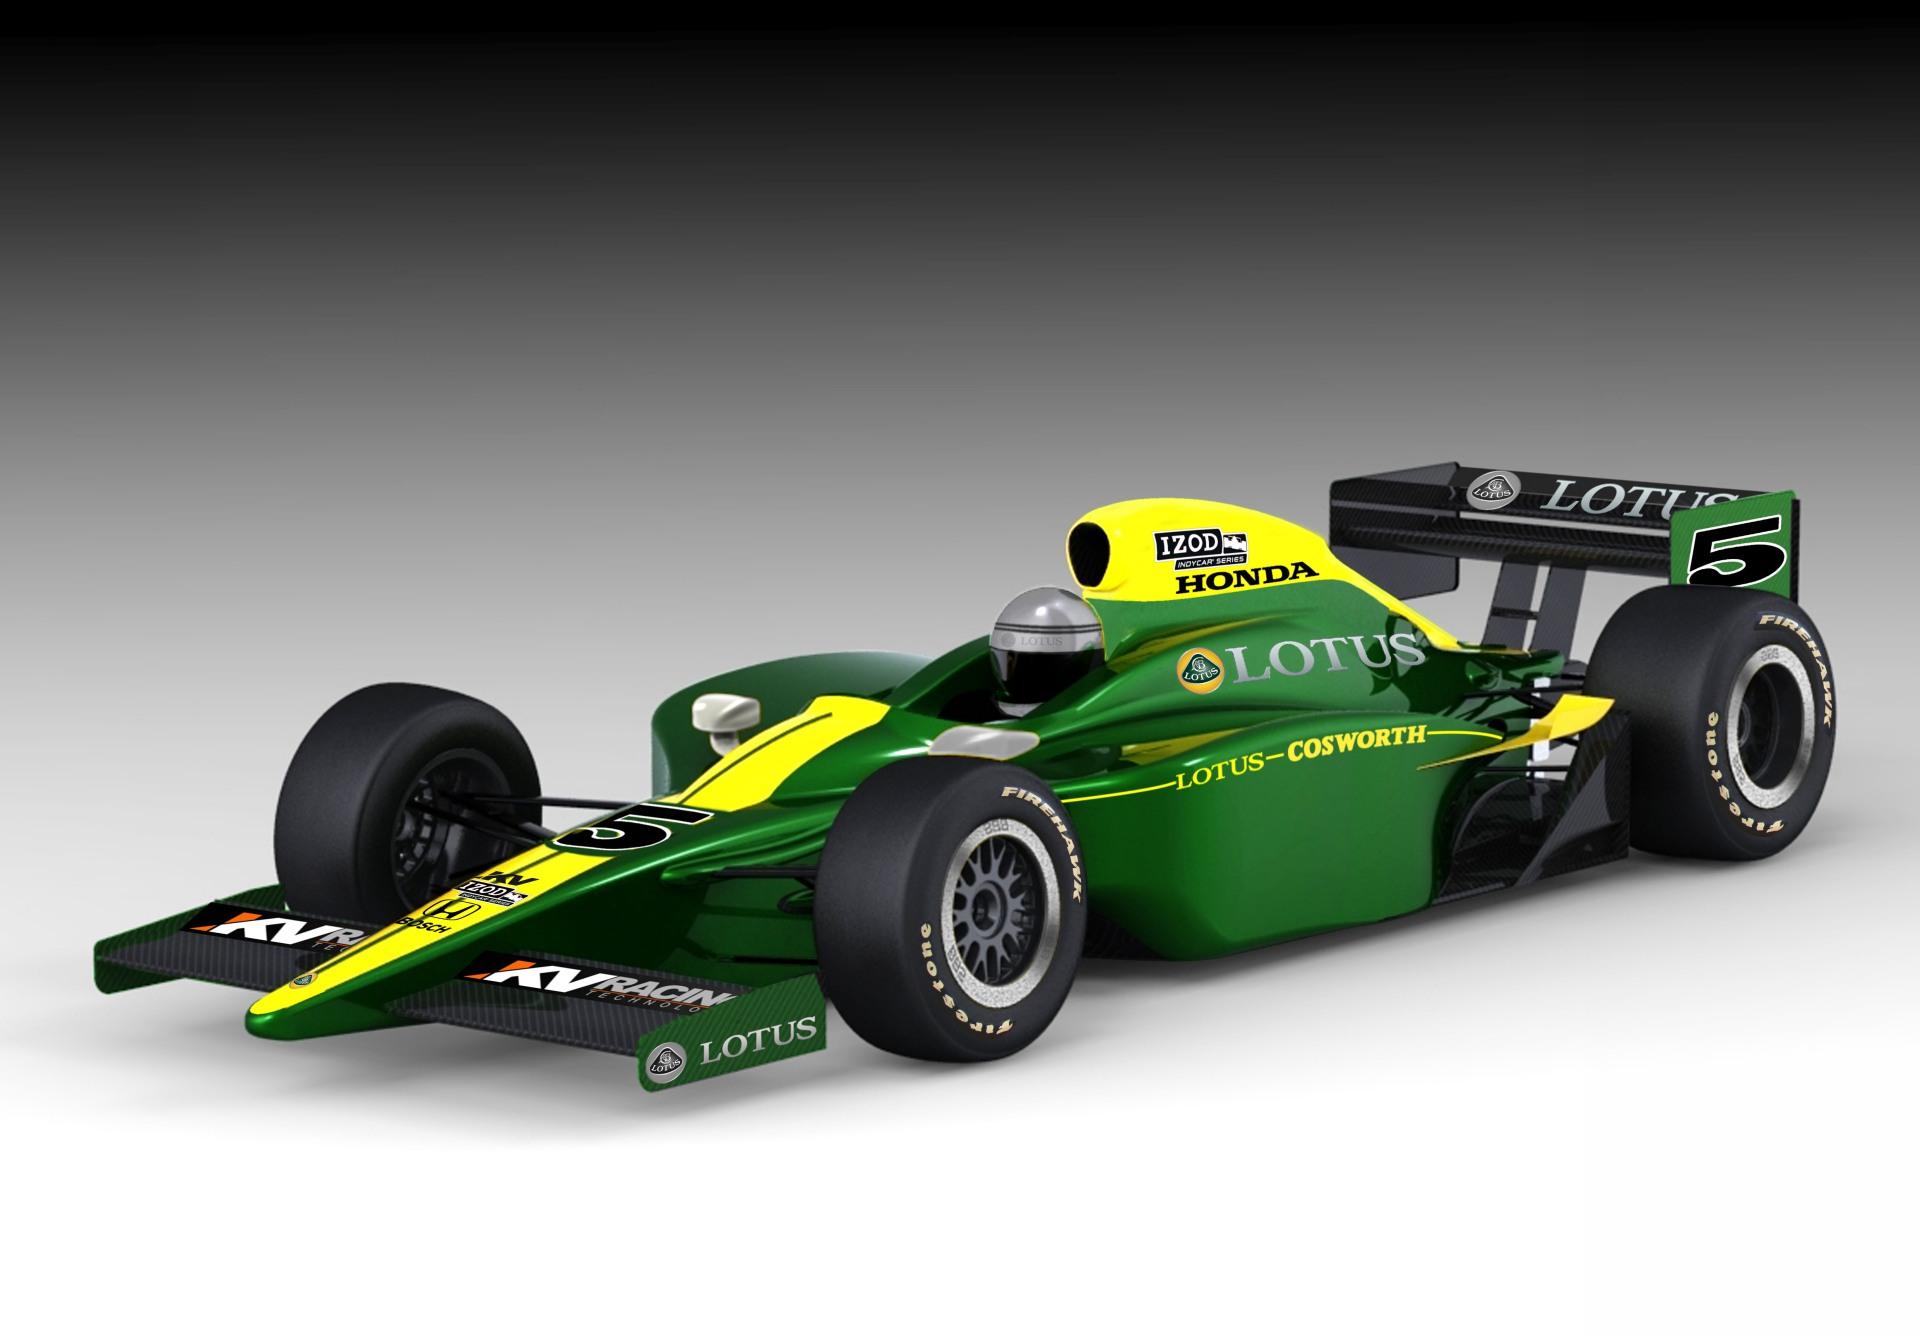 2010 Lotus Cosworth Indy Racer - Indy Car Co2 Cars , HD Wallpaper & Backgrounds